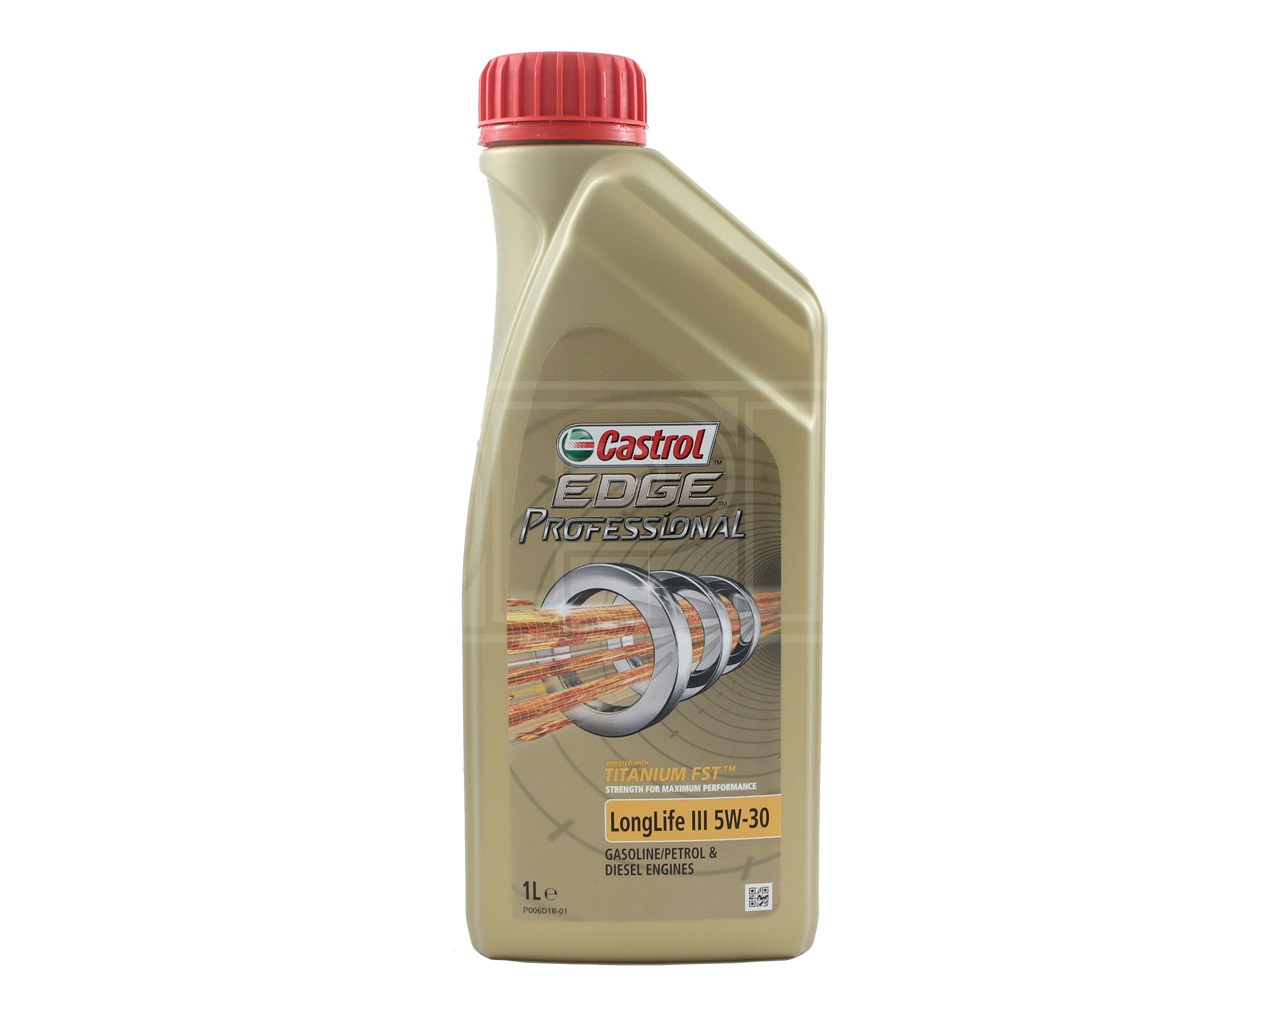 Castrol Edge Professional Long Life III 5w-30 Fully Synthetic Engine Oil